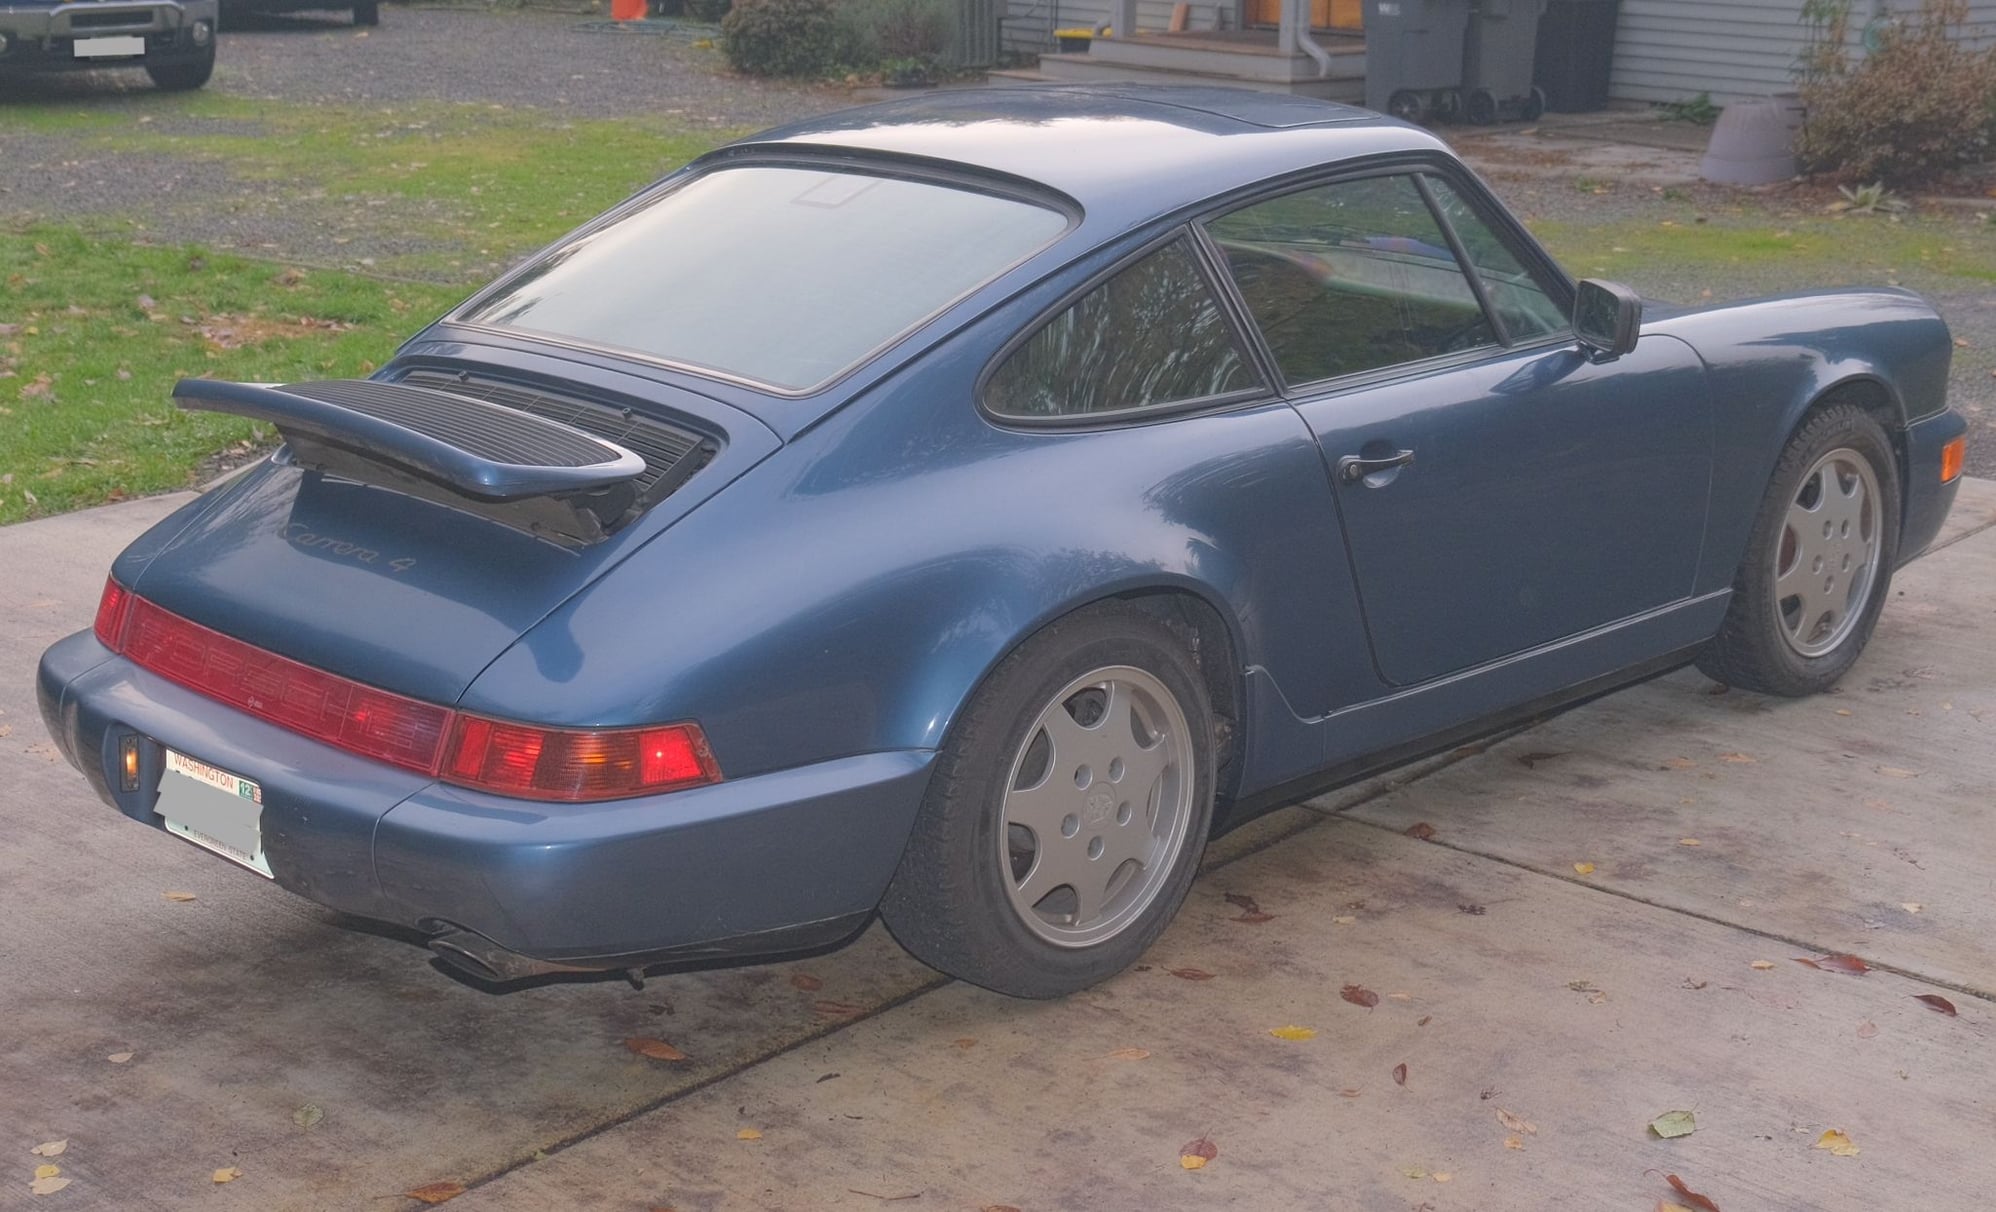 1990 Porsche 911 - 1990 C4 Coupe - Used - VIN WP0AB2964LS451751 - 6 cyl - AWD - Manual - Coupe - Blue - Poulsbo, WA 98370, United States